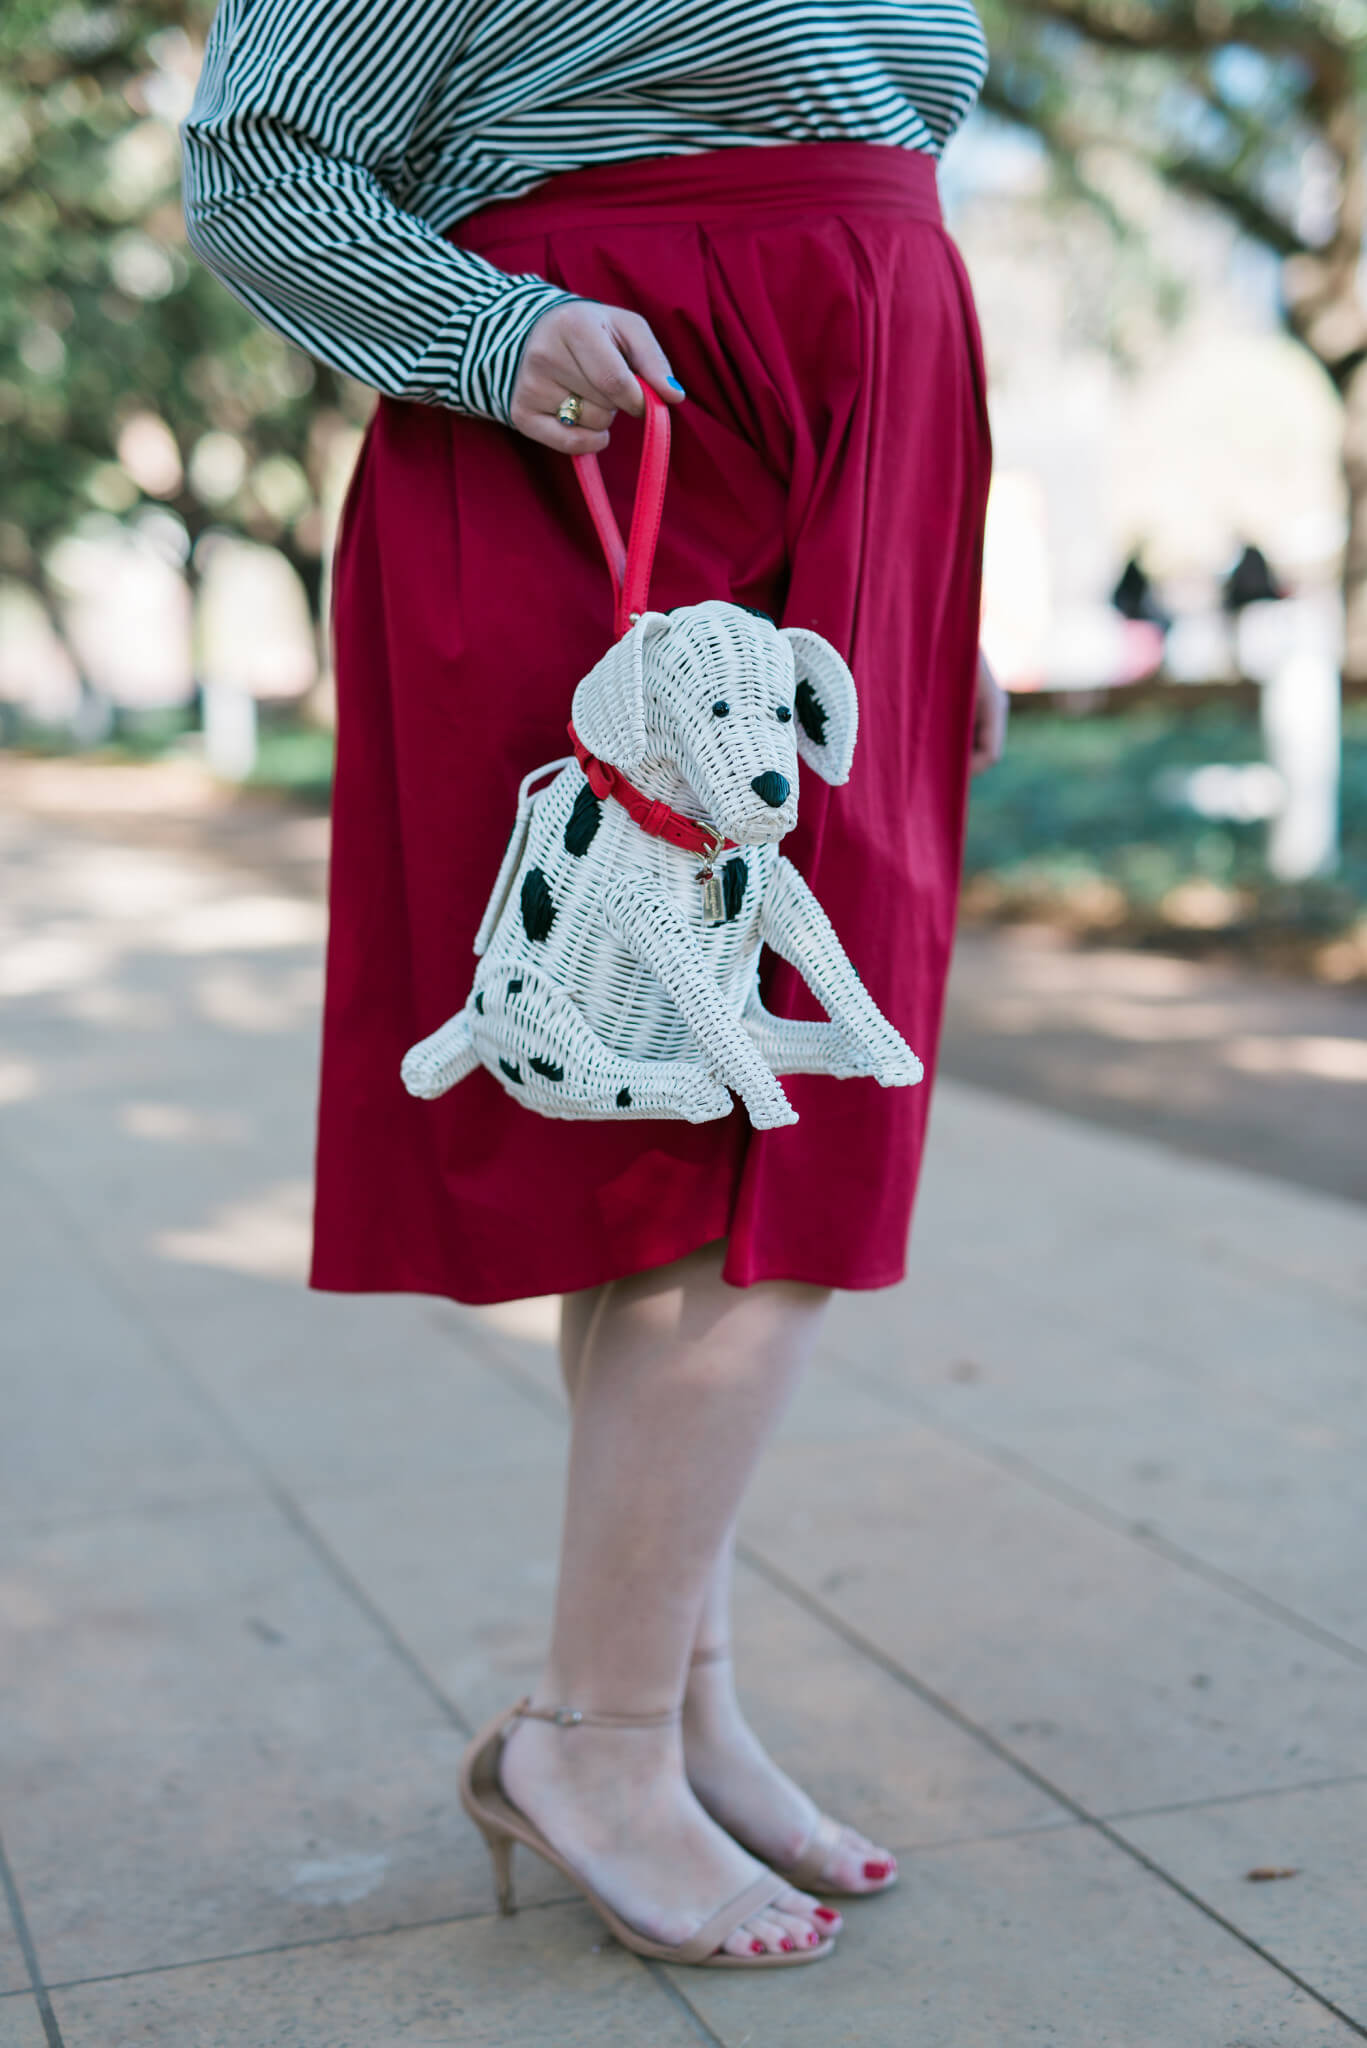 Puppy Love - Something Gold, Something Blue fashion blog - Kate Spade Puppy Purse dalmation wicker purse is the perfect accessory